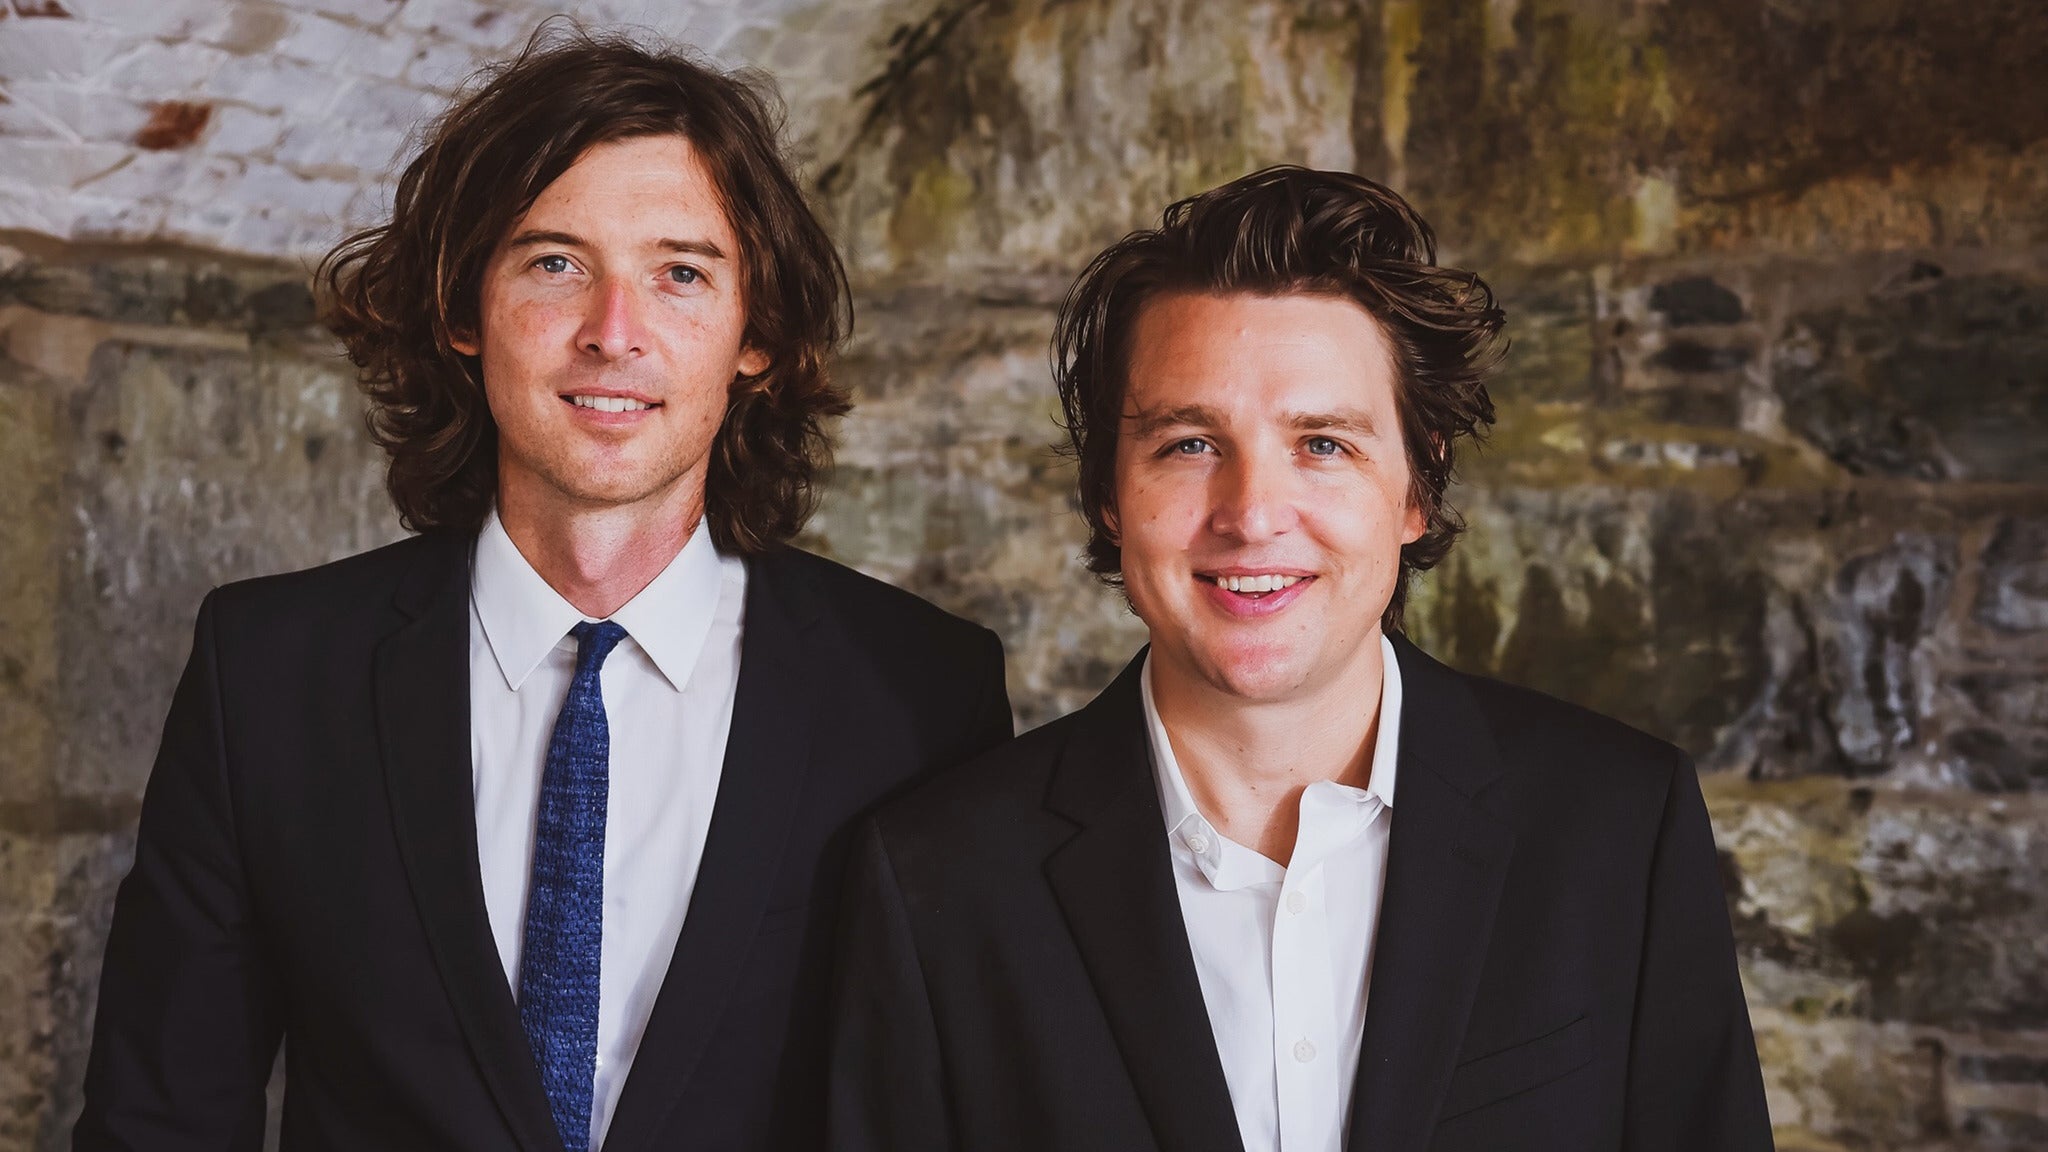 The Milk Carton Kids in Minneapolis promo photo for VIP Package presale offer code